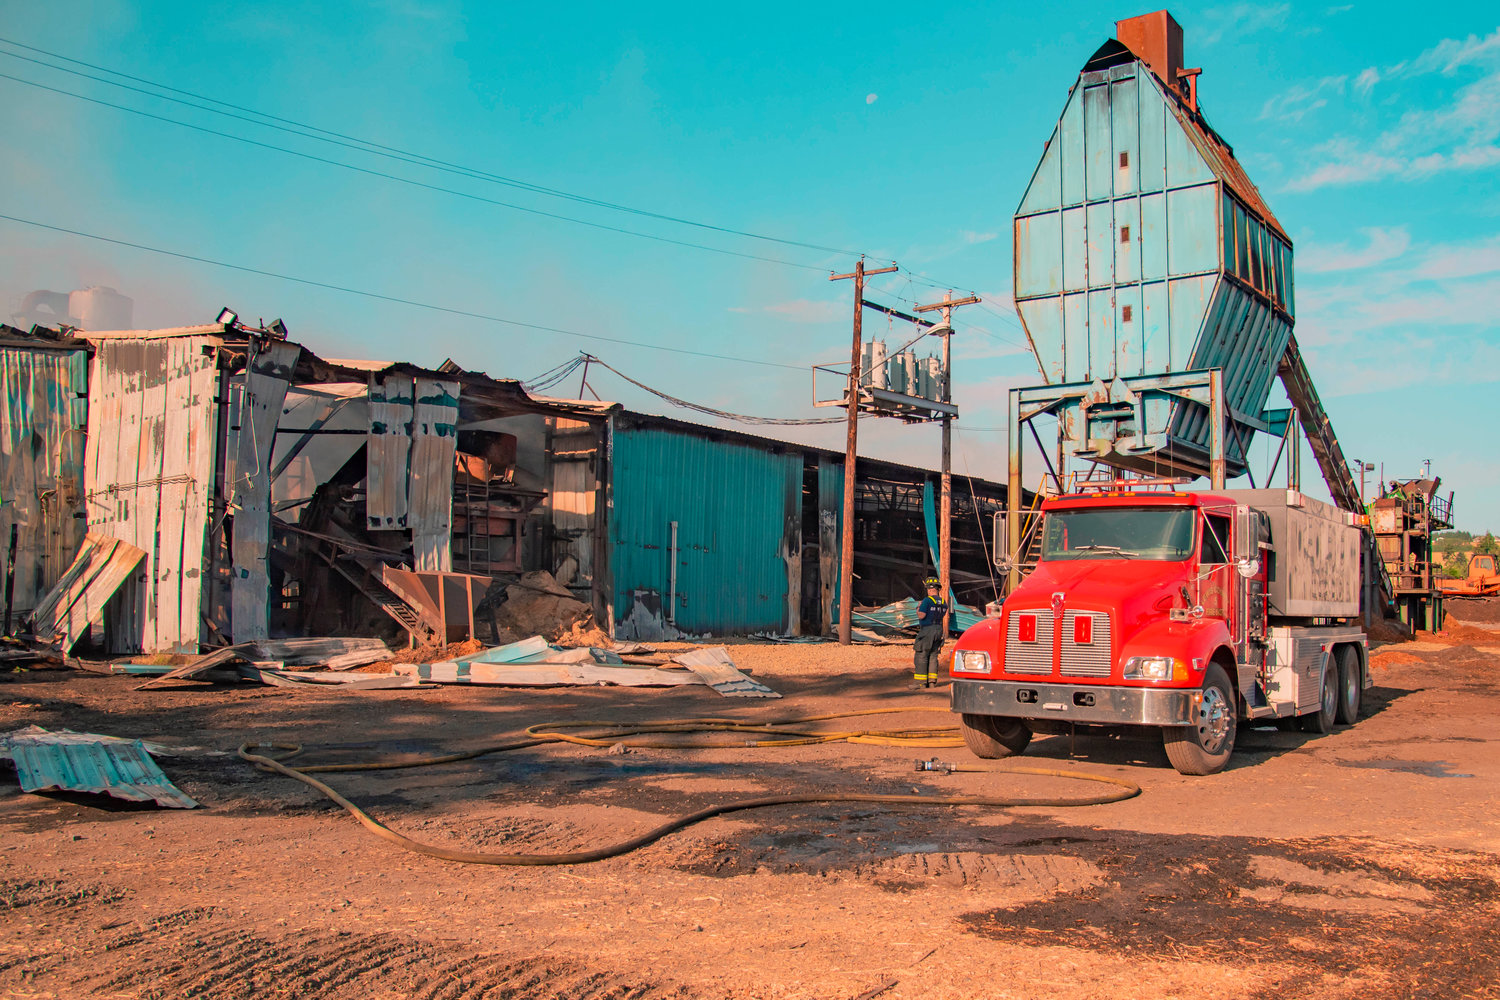 A Lewis County Fire District 5 engine responds to a fire at Winlock Fibre early Wednesday morning.